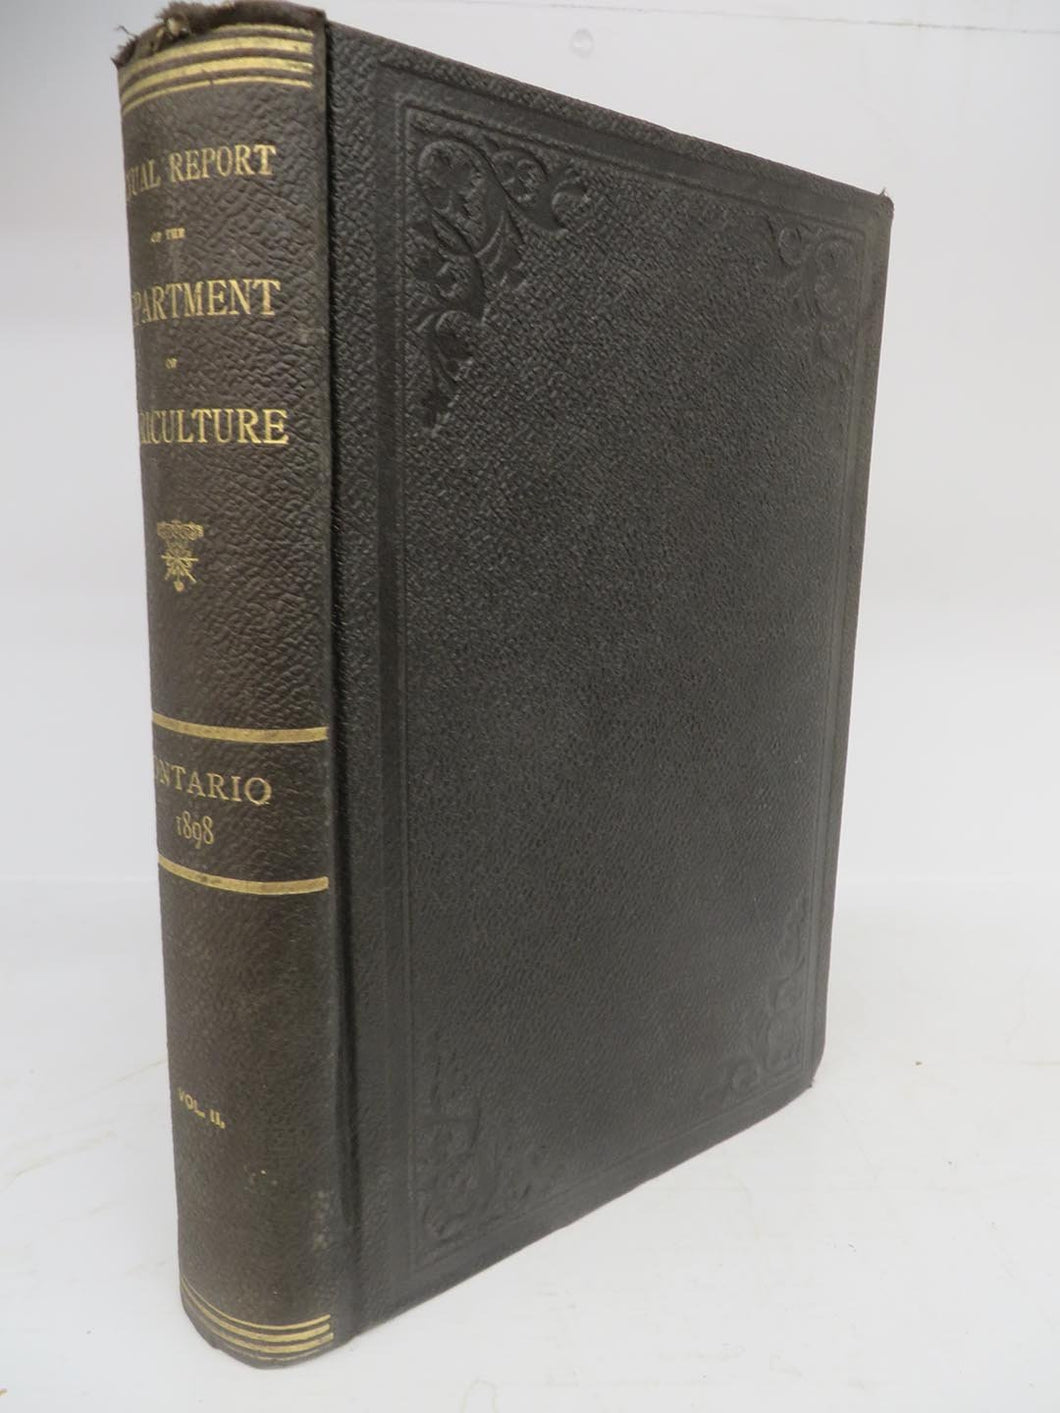 Annual Report of the Department of Agriculture of the Province of Ontario. 1898: Vol. II